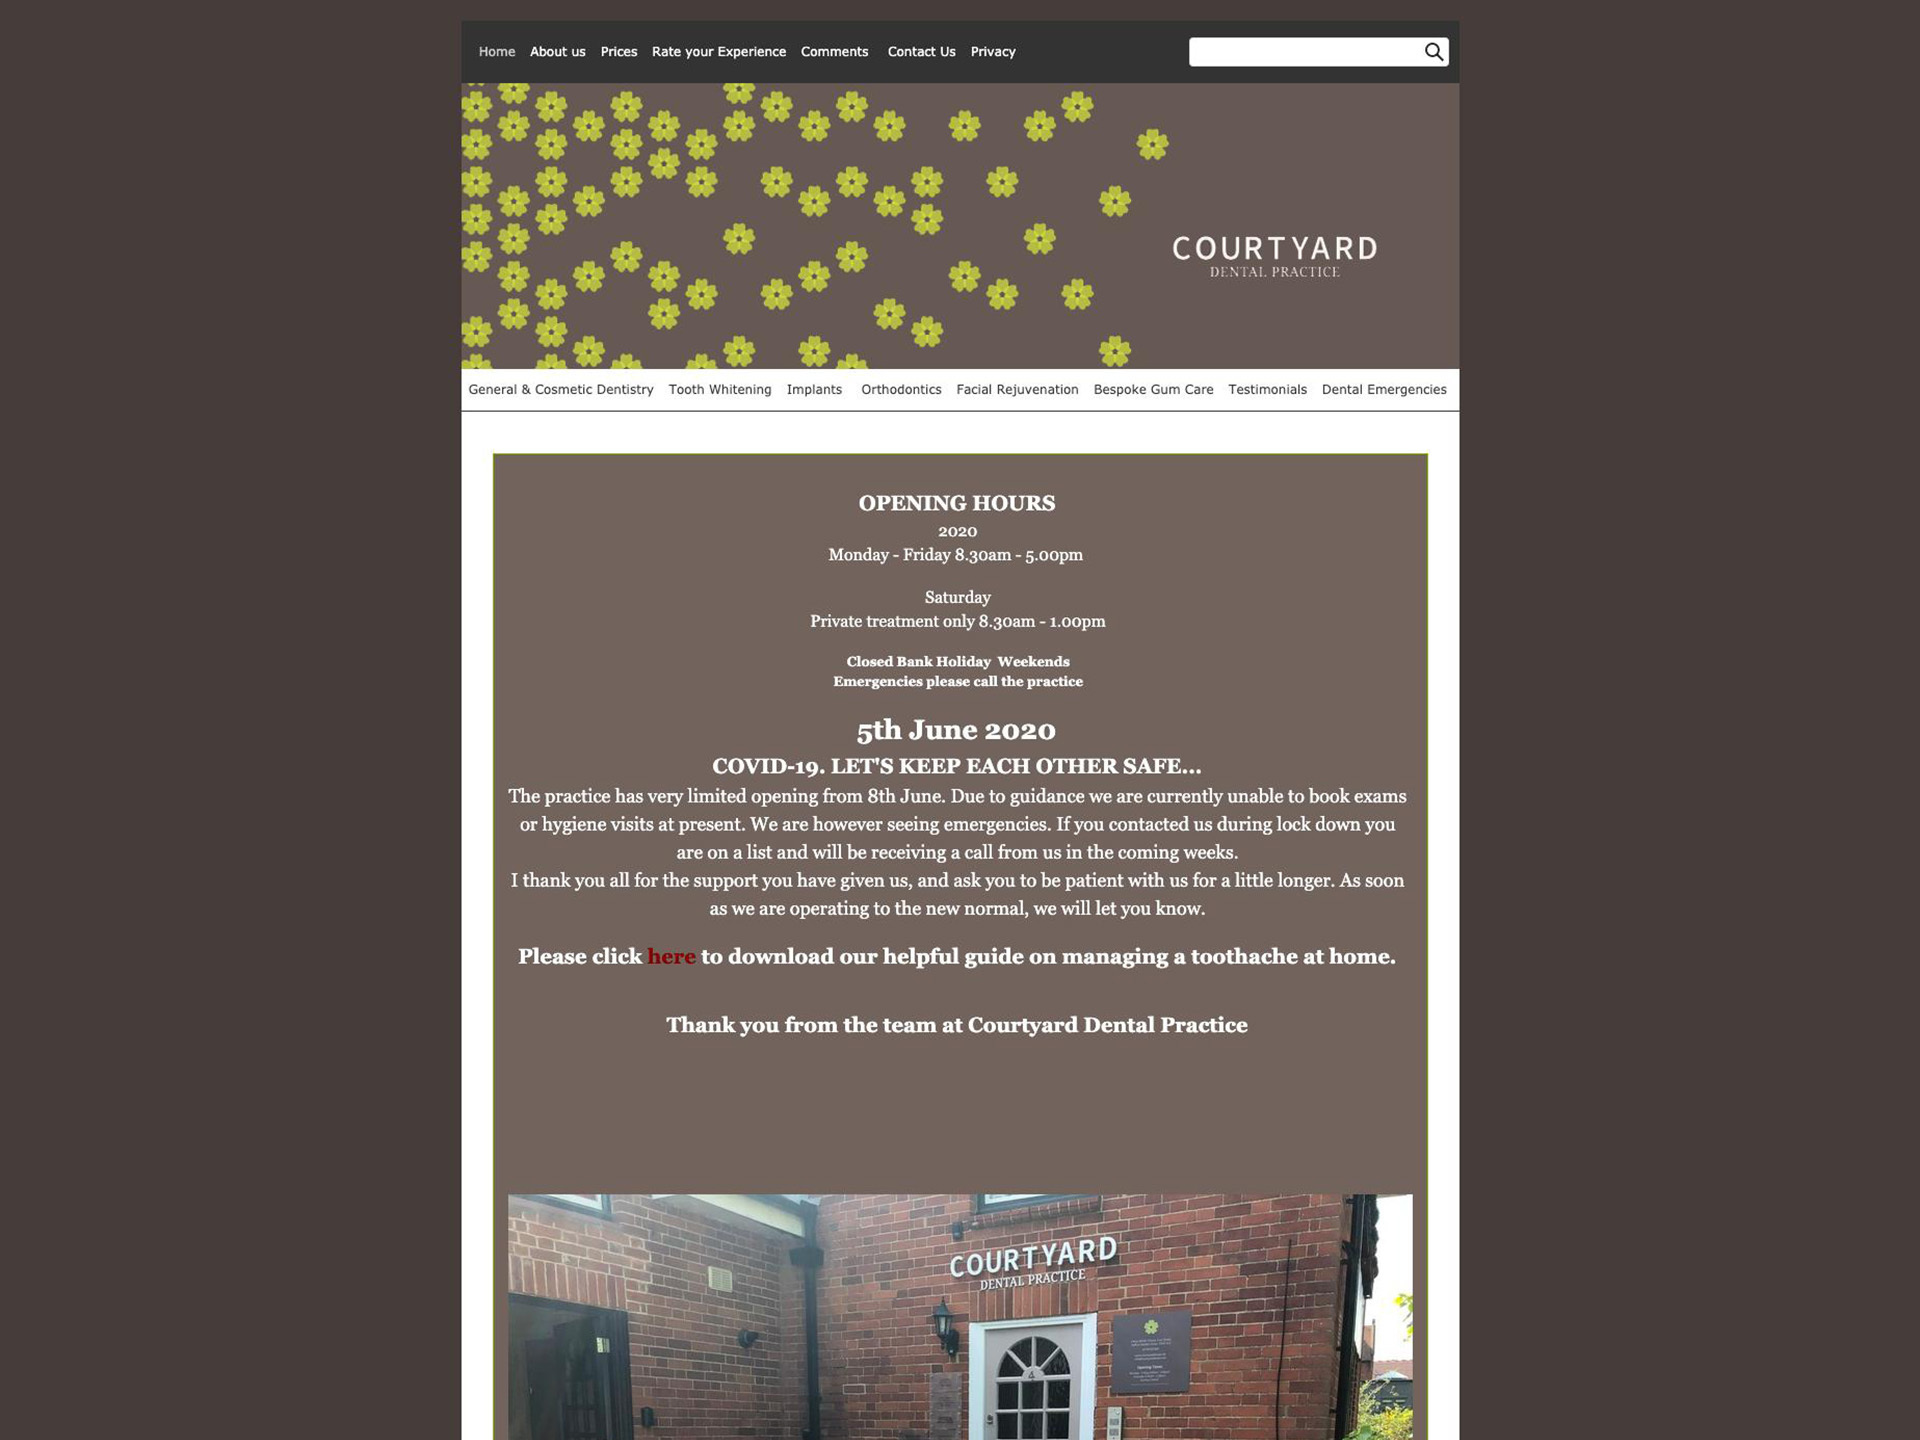 The old Courtyard website design on mobile